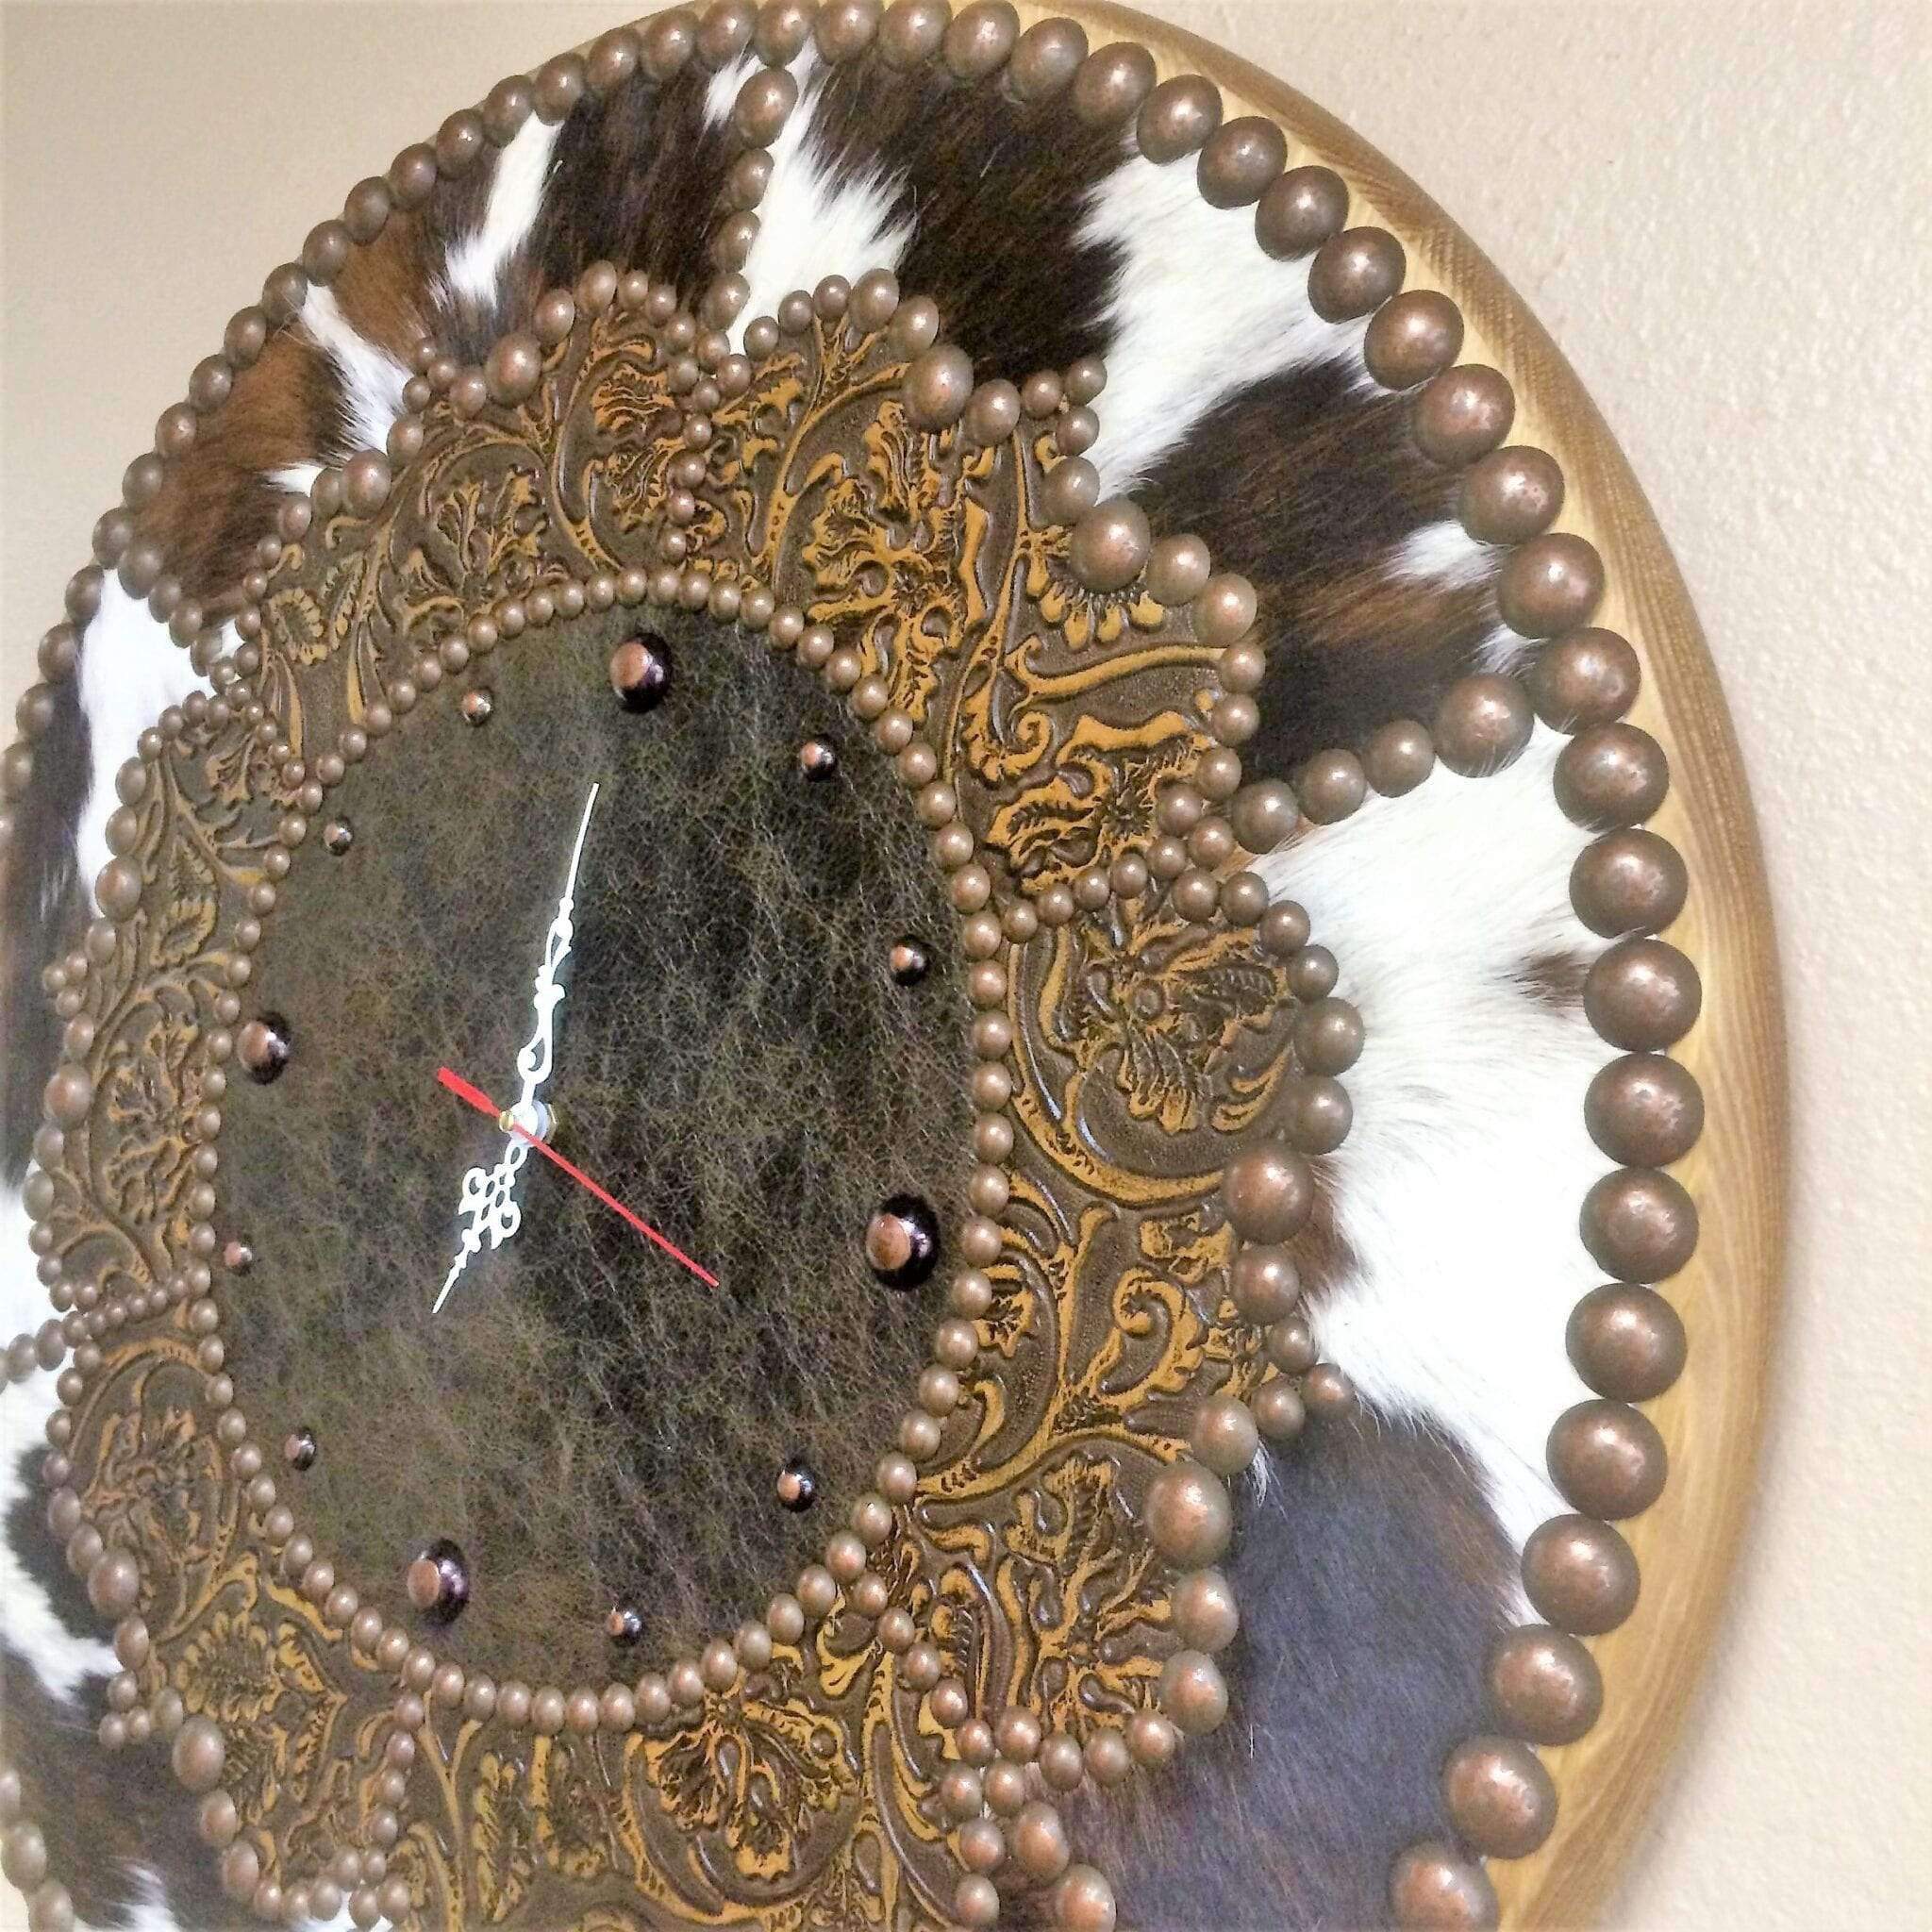 Wall clock made of horsehide